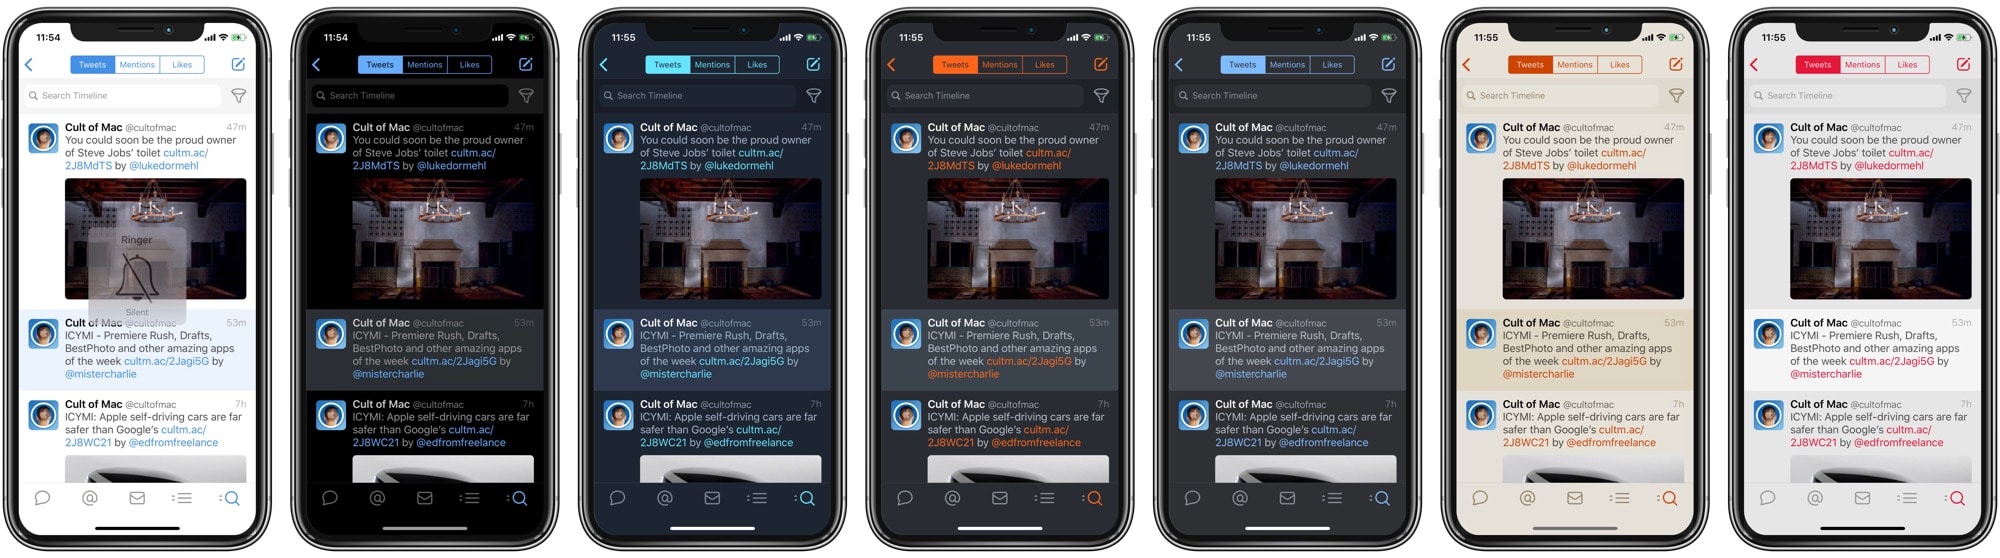 Tweetbot now has seven themes, if you know how to find them.